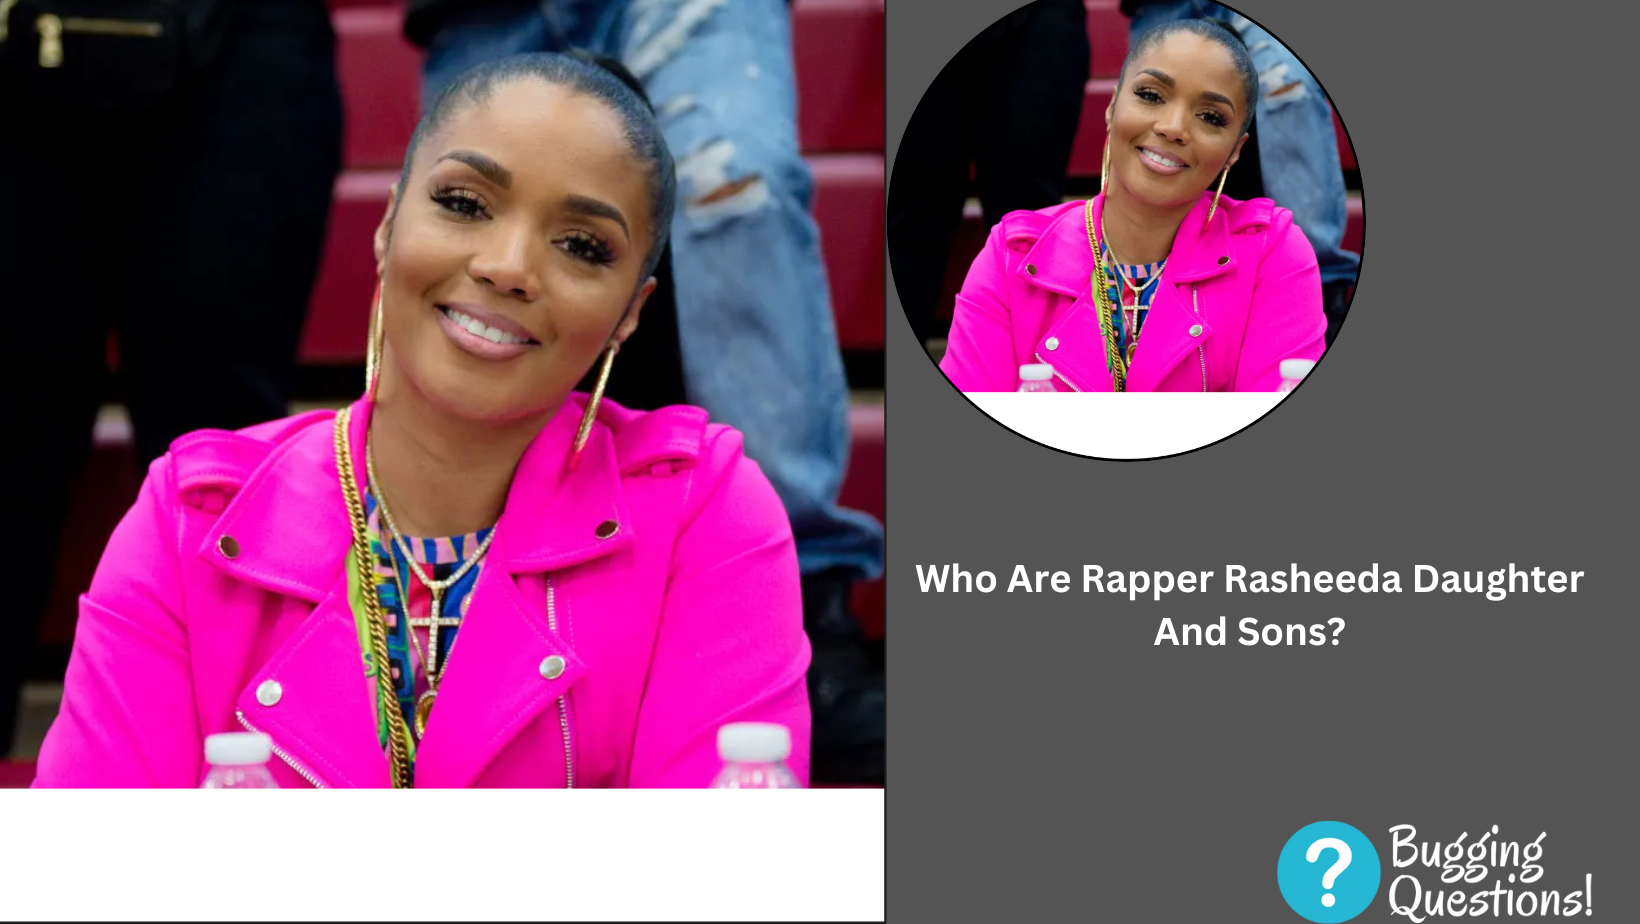 Who Are Rapper Rasheeda Daughter And Sons?